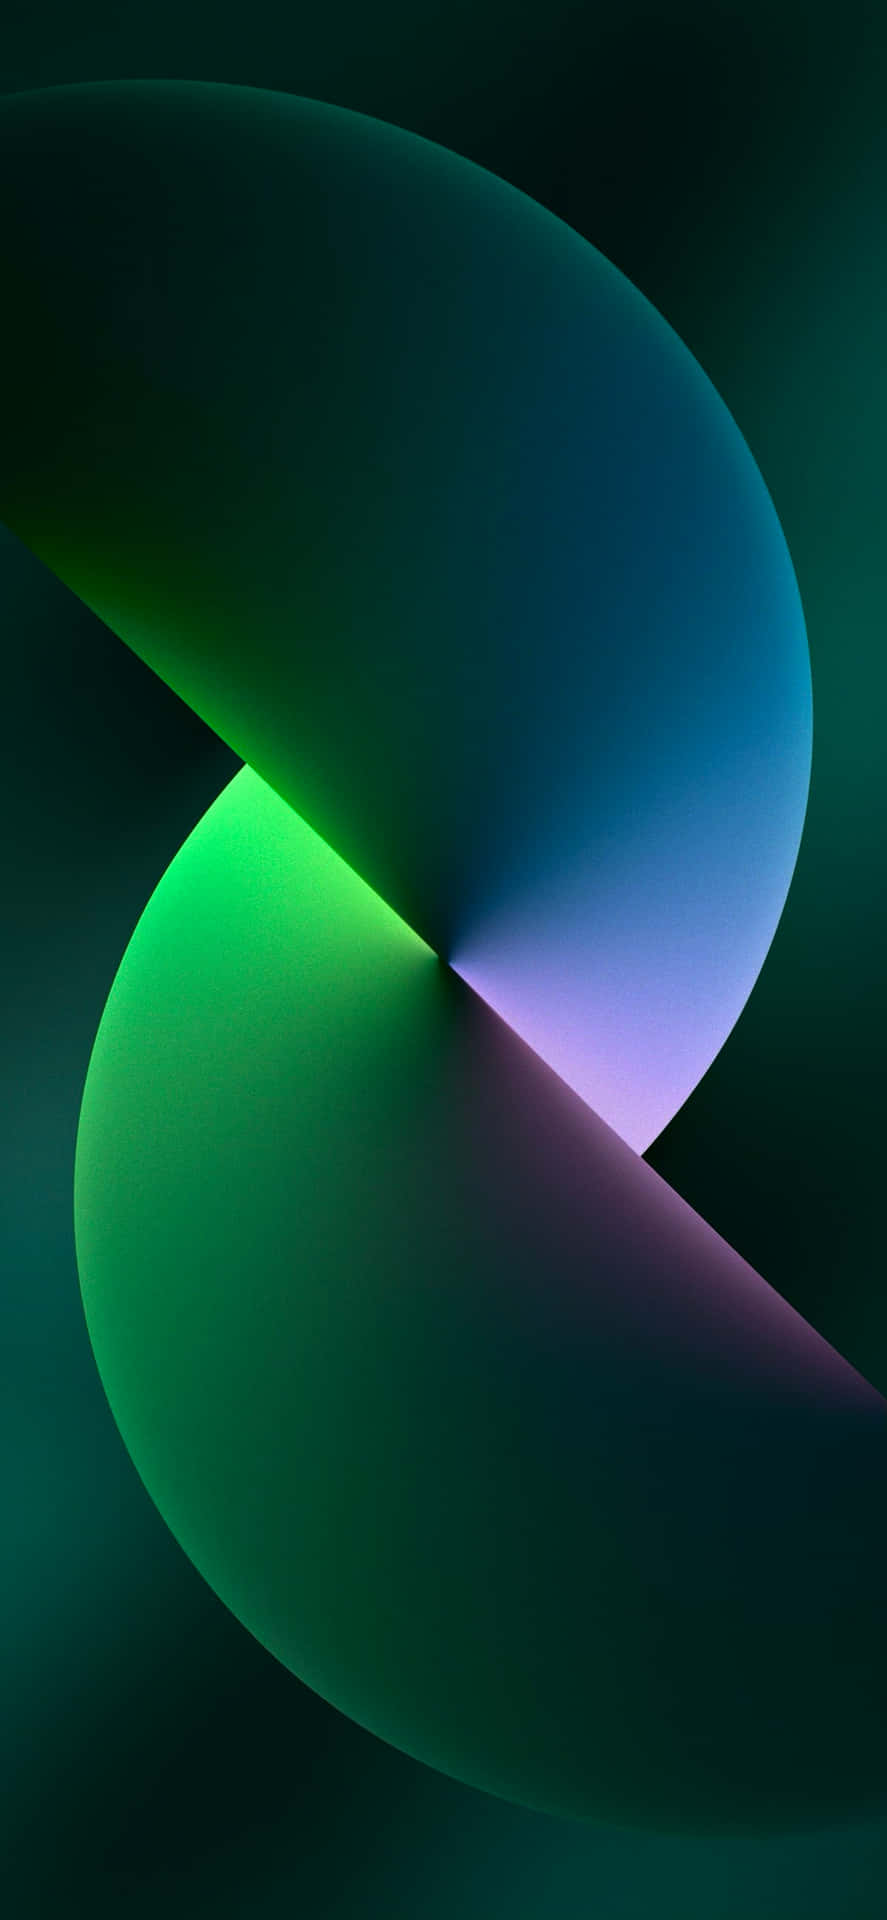 Get ready for summer with the stunning green Iphone 11 Wallpaper